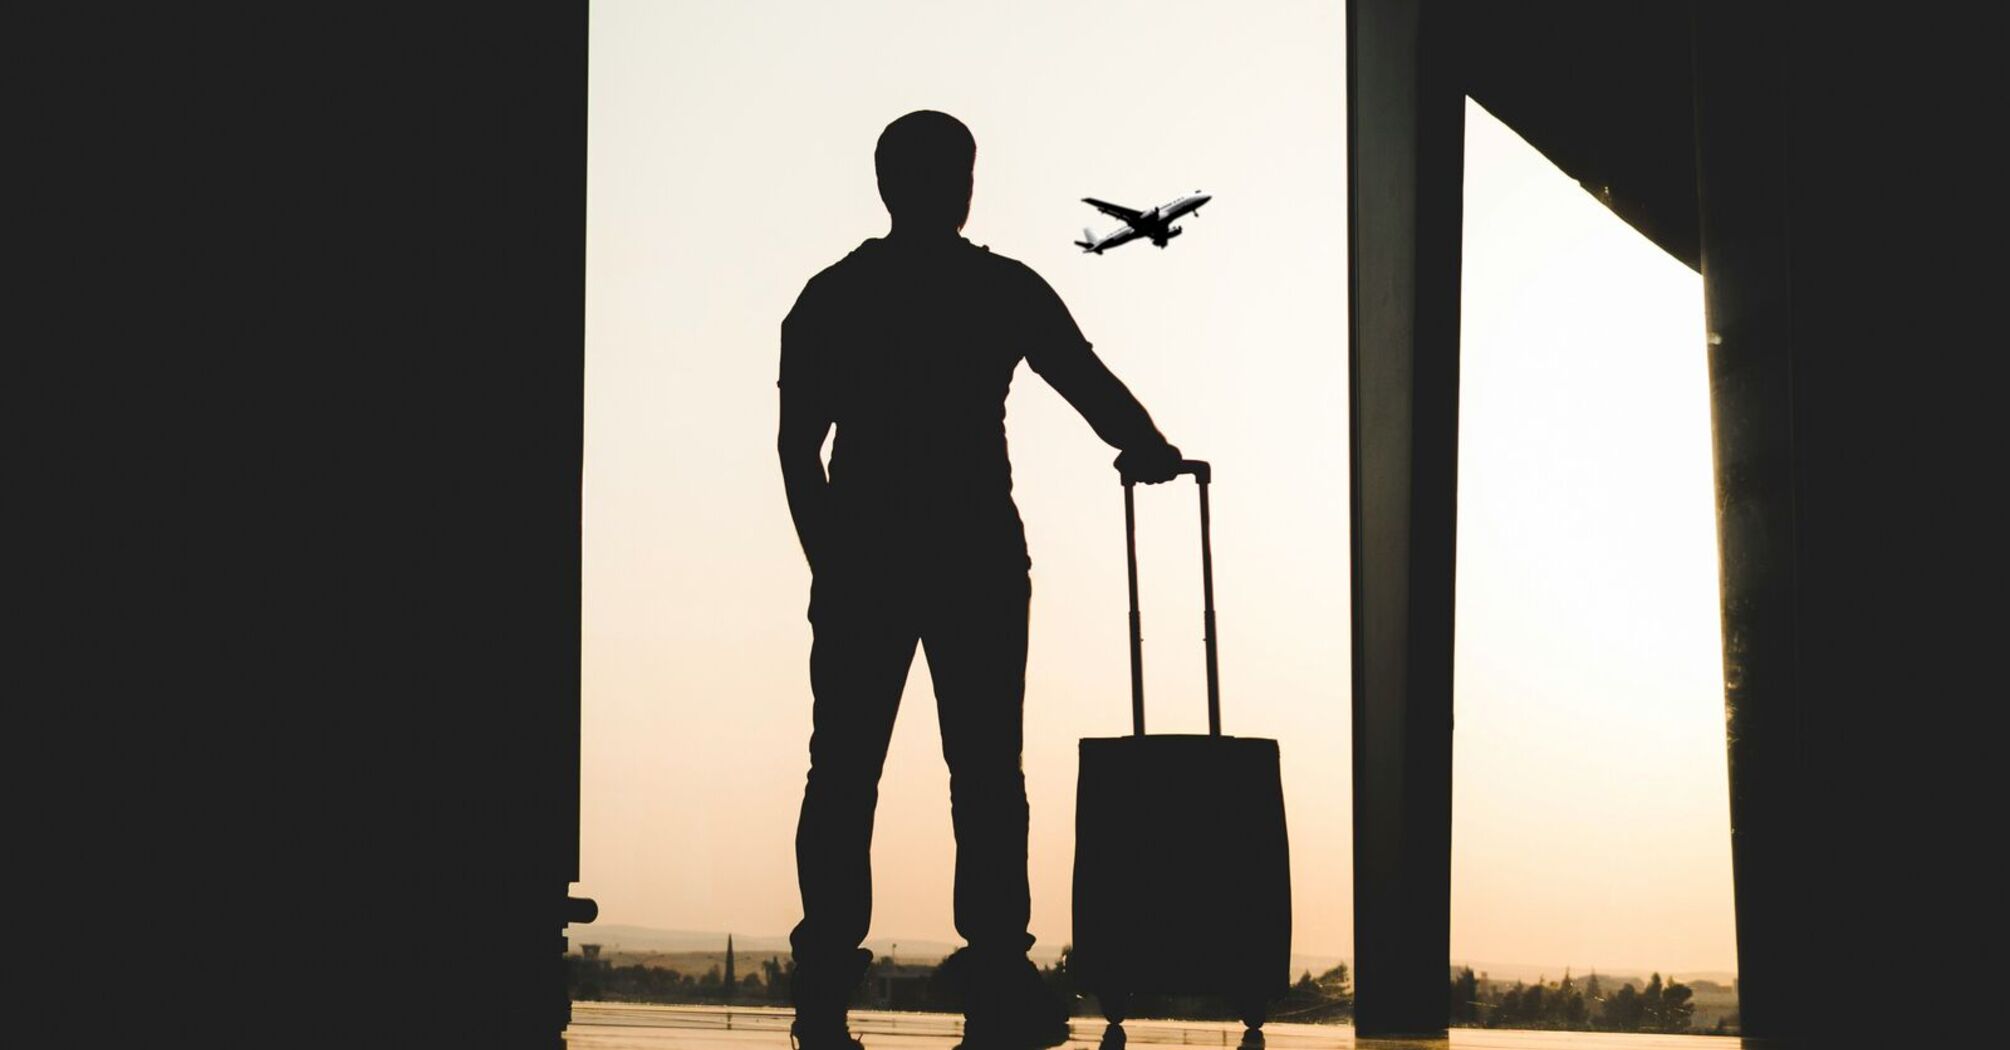 Silhouette of a person standing in an airport terminal with a suitcase